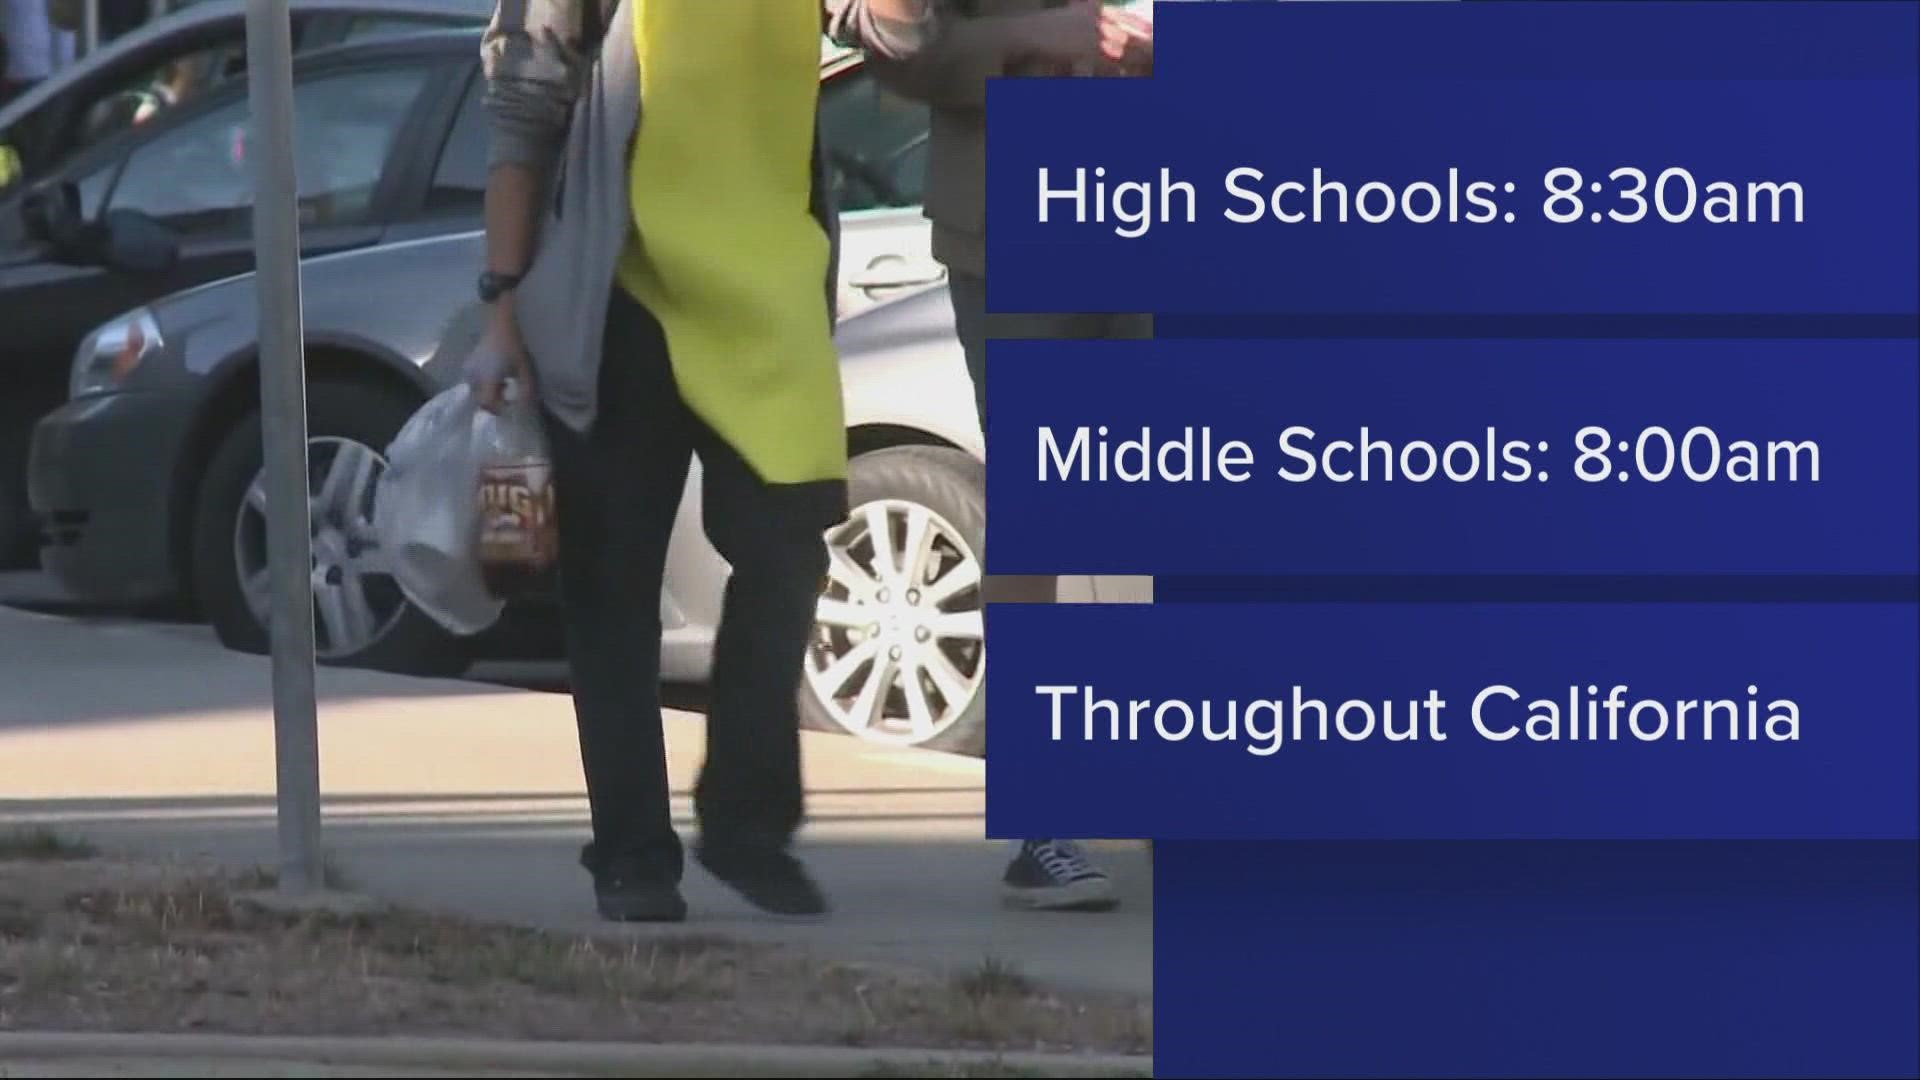 Not all students are excited for the bump in time, with high schools now starting at 8:30 a.m. and middle schools at 8 a.m. across California.